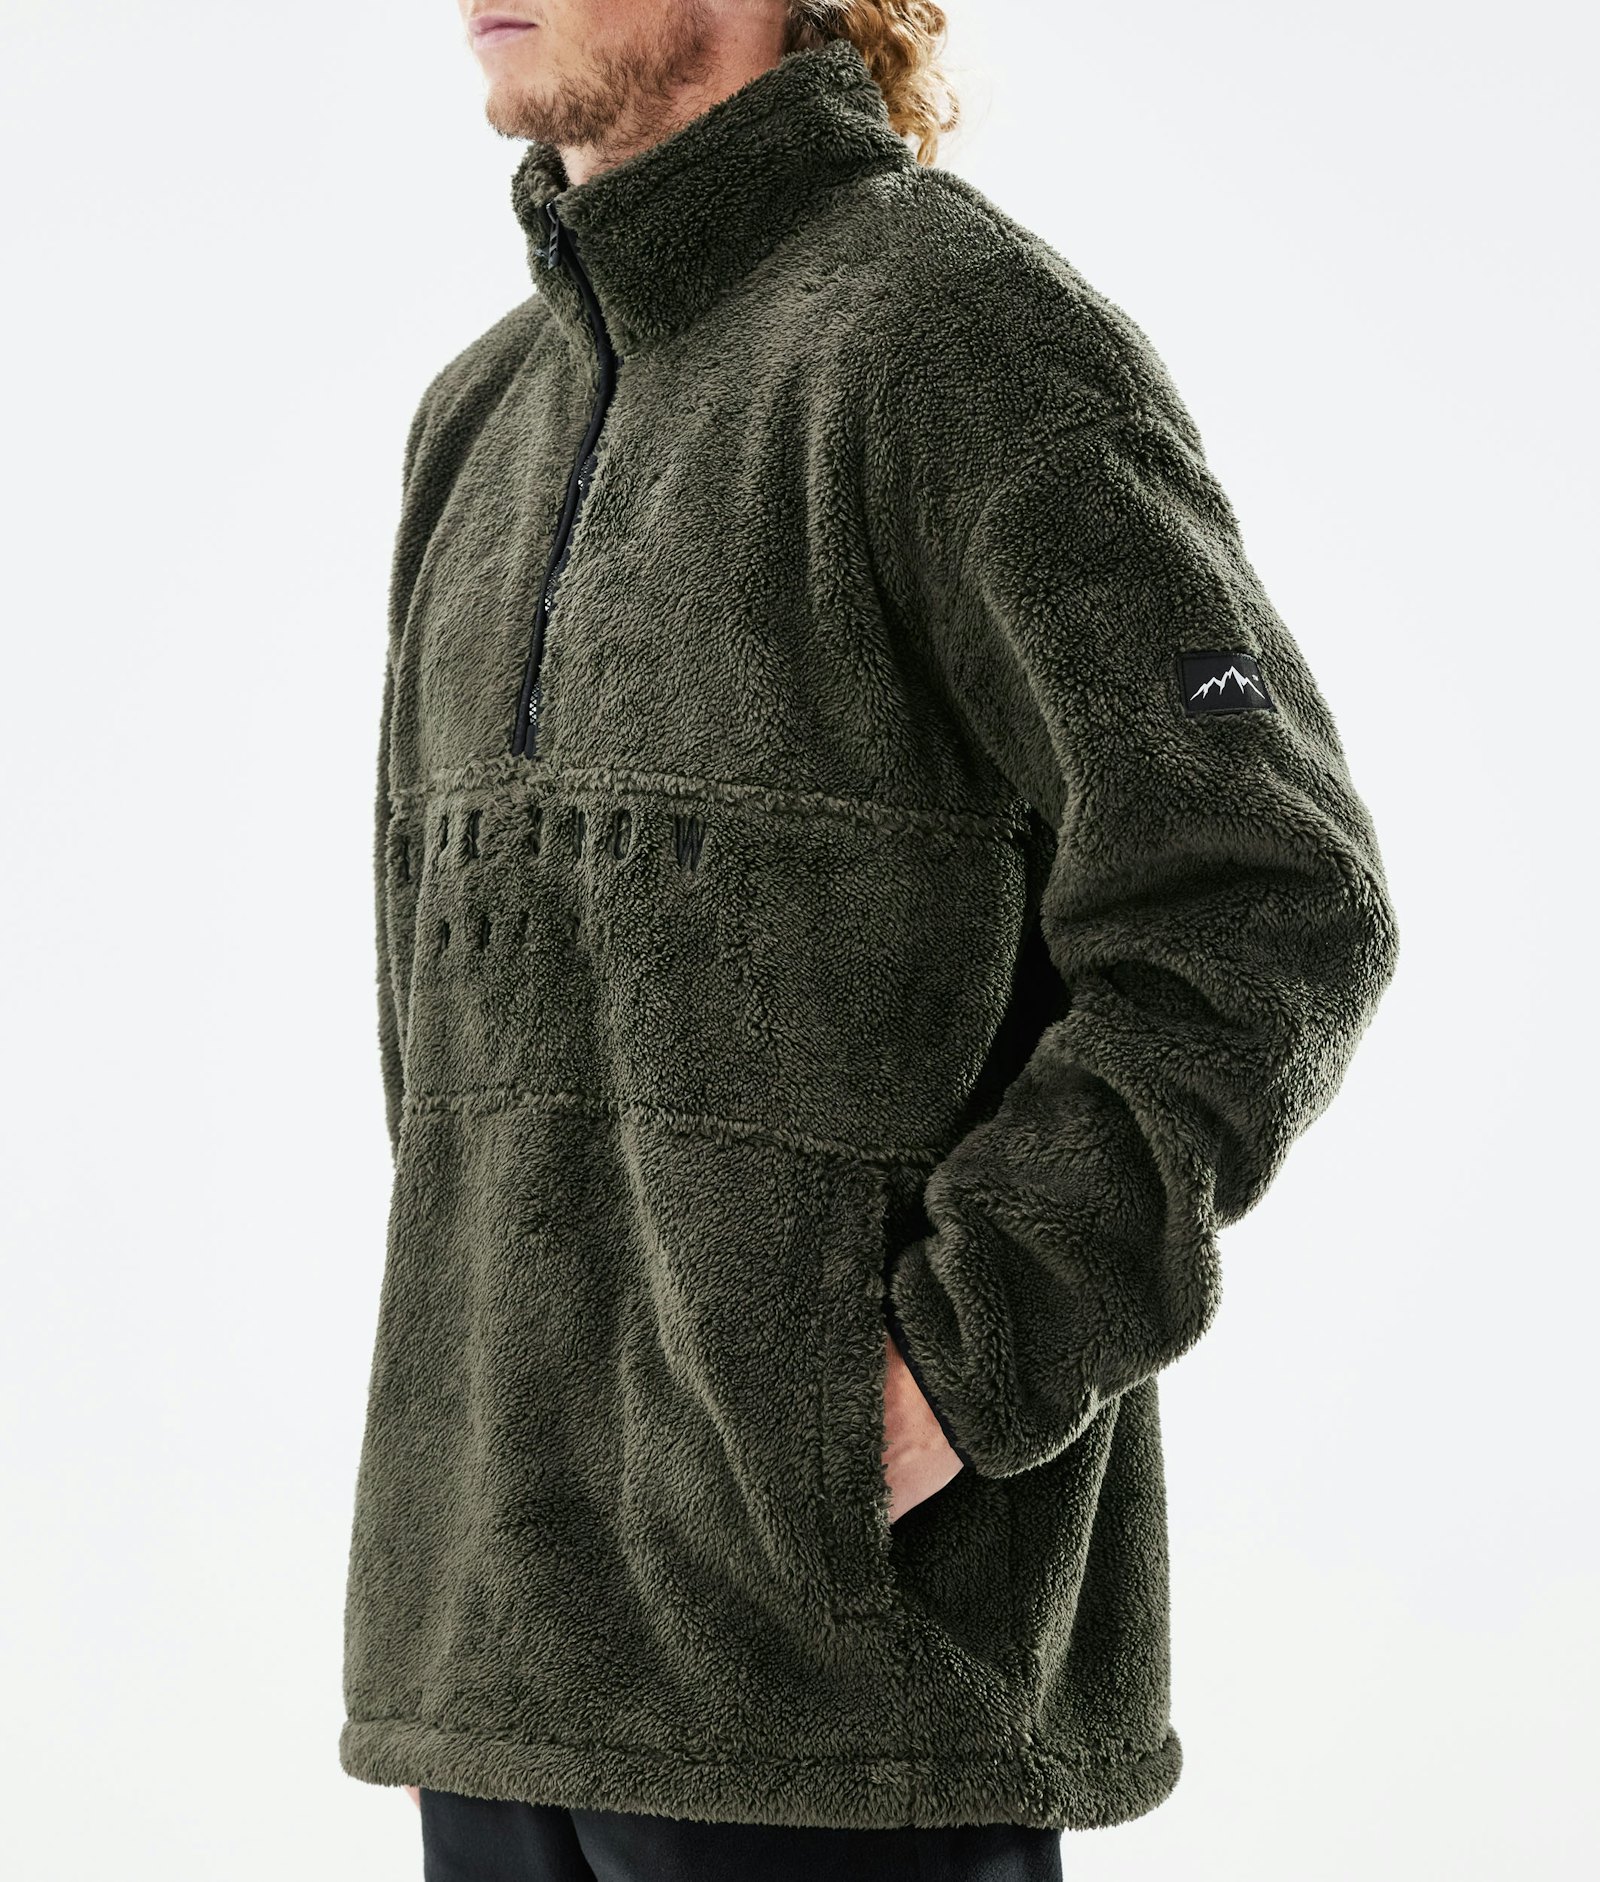 Dope Pile 2021 Sweat Polaire Homme Olive Green